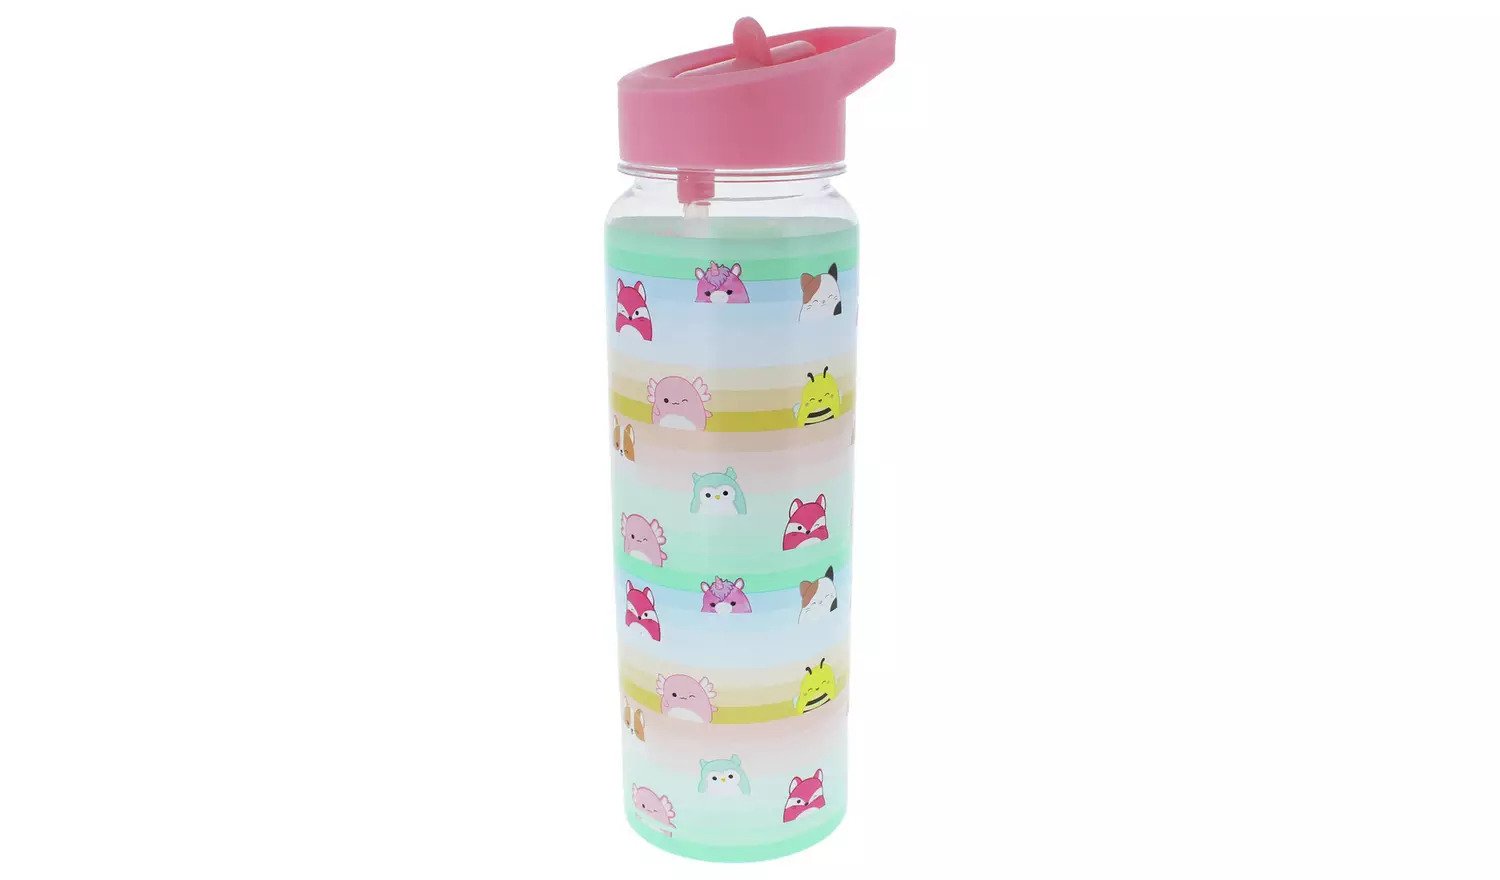 A Squishmallow waterbottle. It's clear with a pink lid and a pink and blue striped transfer covering most of it with little cartoon Squishmallow's over it.